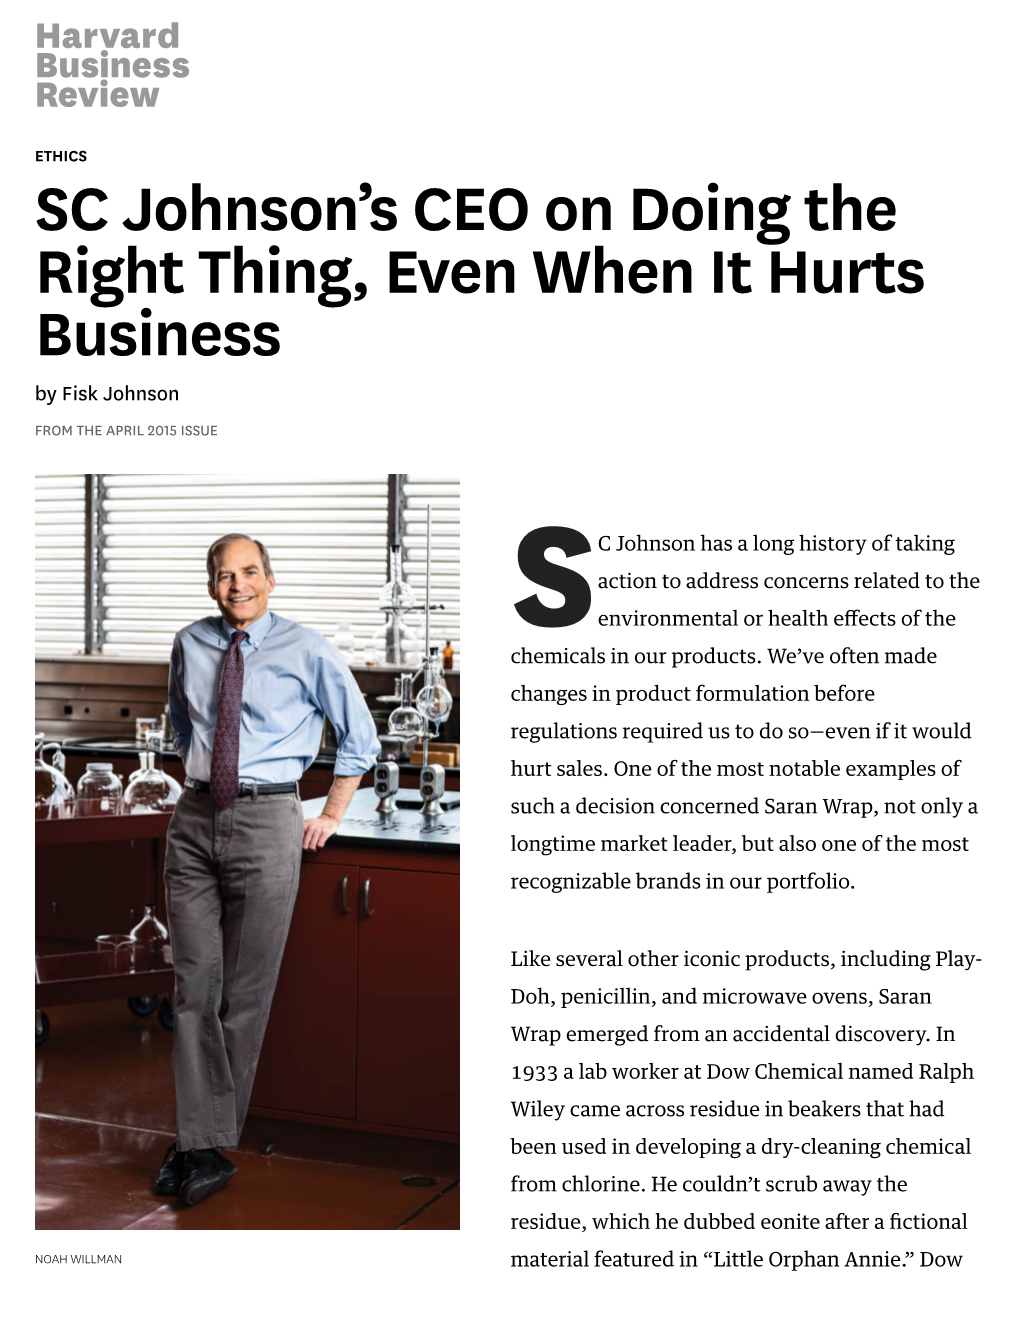 SC Johnson's CEO on Doing the Right Thing, Even When It Hurts Business